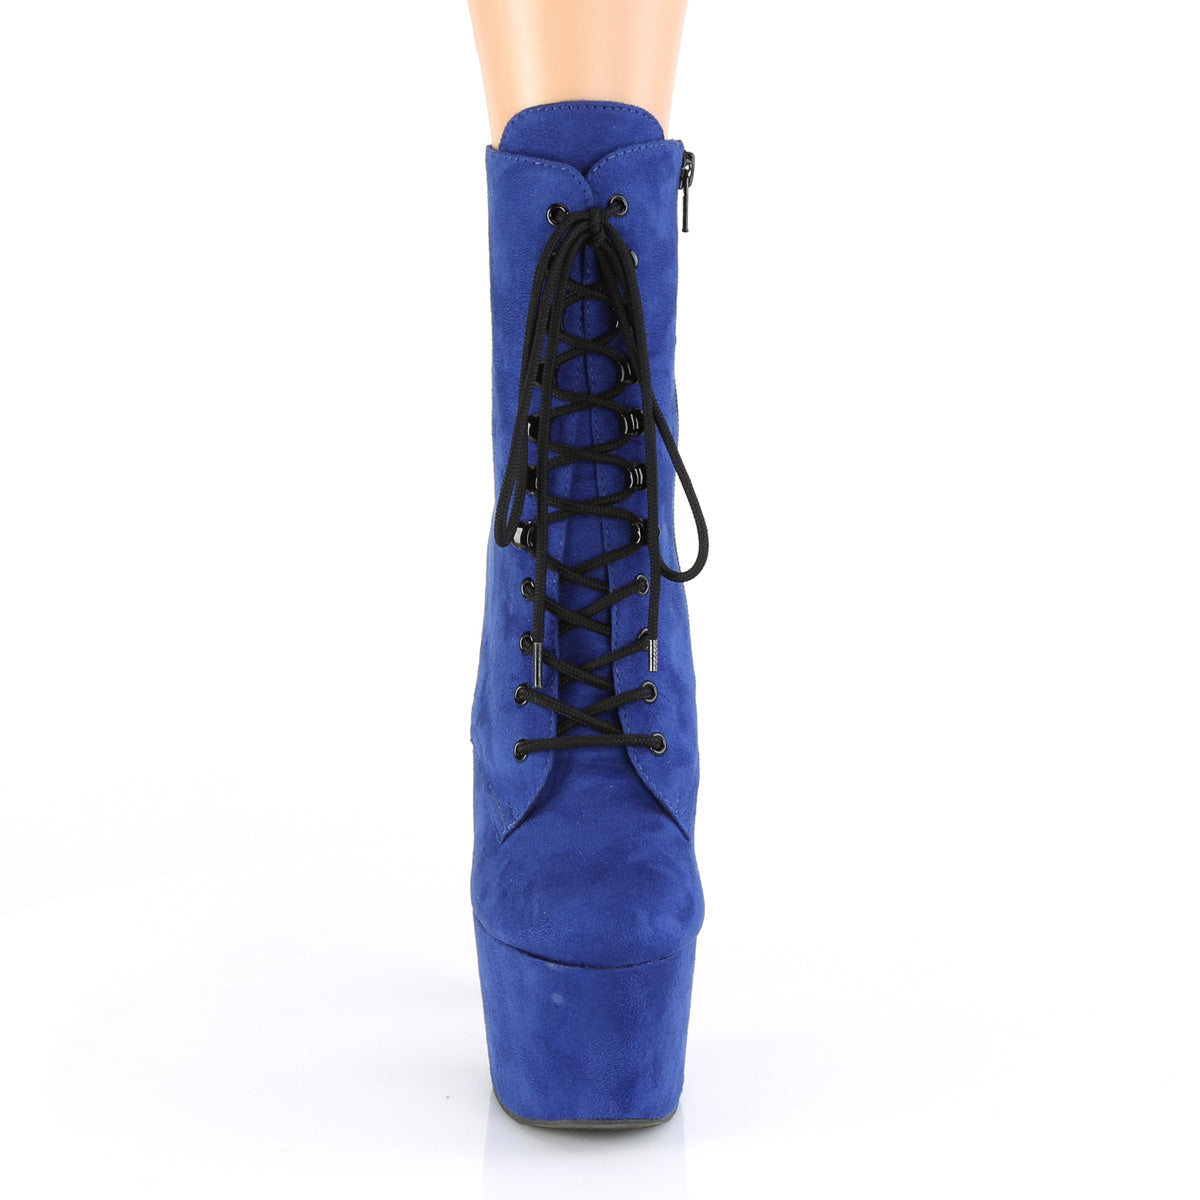 ADORE-1020FS 7" Heel Royal Blue Exotic Dancing Ankle Boots-Pleaser- Sexy Shoes Alternative Footwear